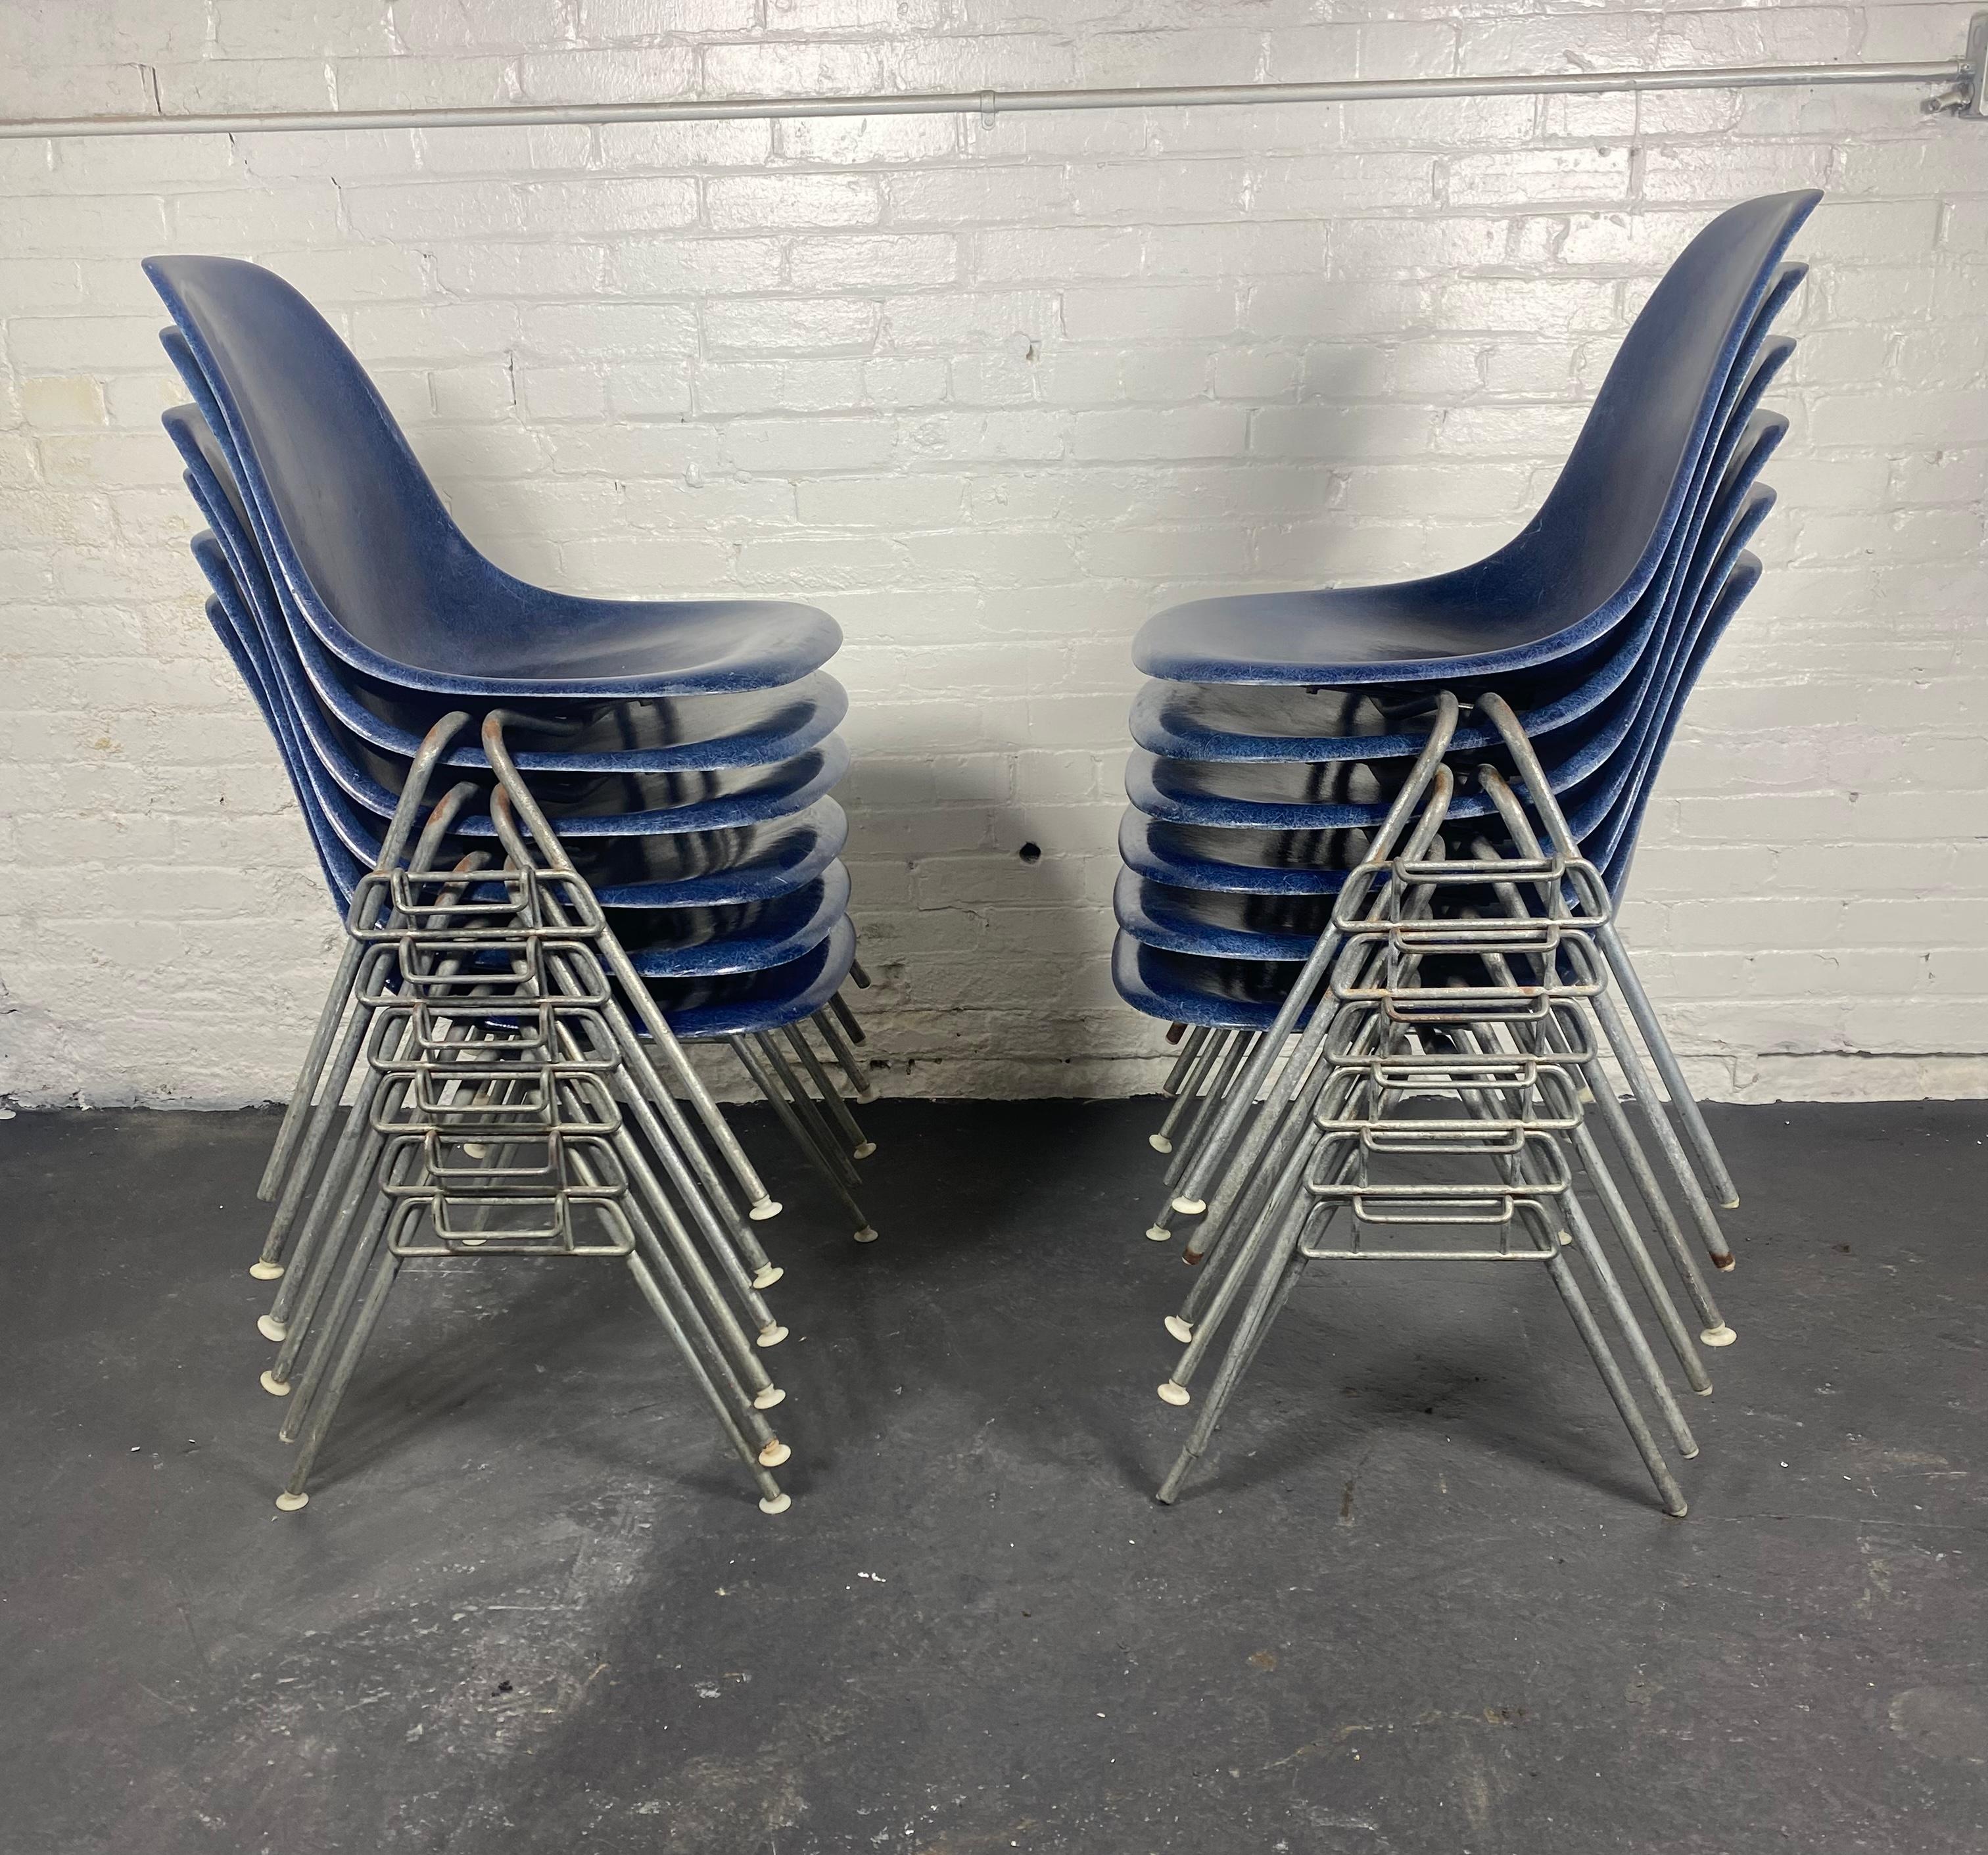 Mid-20th Century 12 DSS Stacking Chairs Charles & Ray Eames Herman Miller, Blue Fiberglass, 1960s For Sale